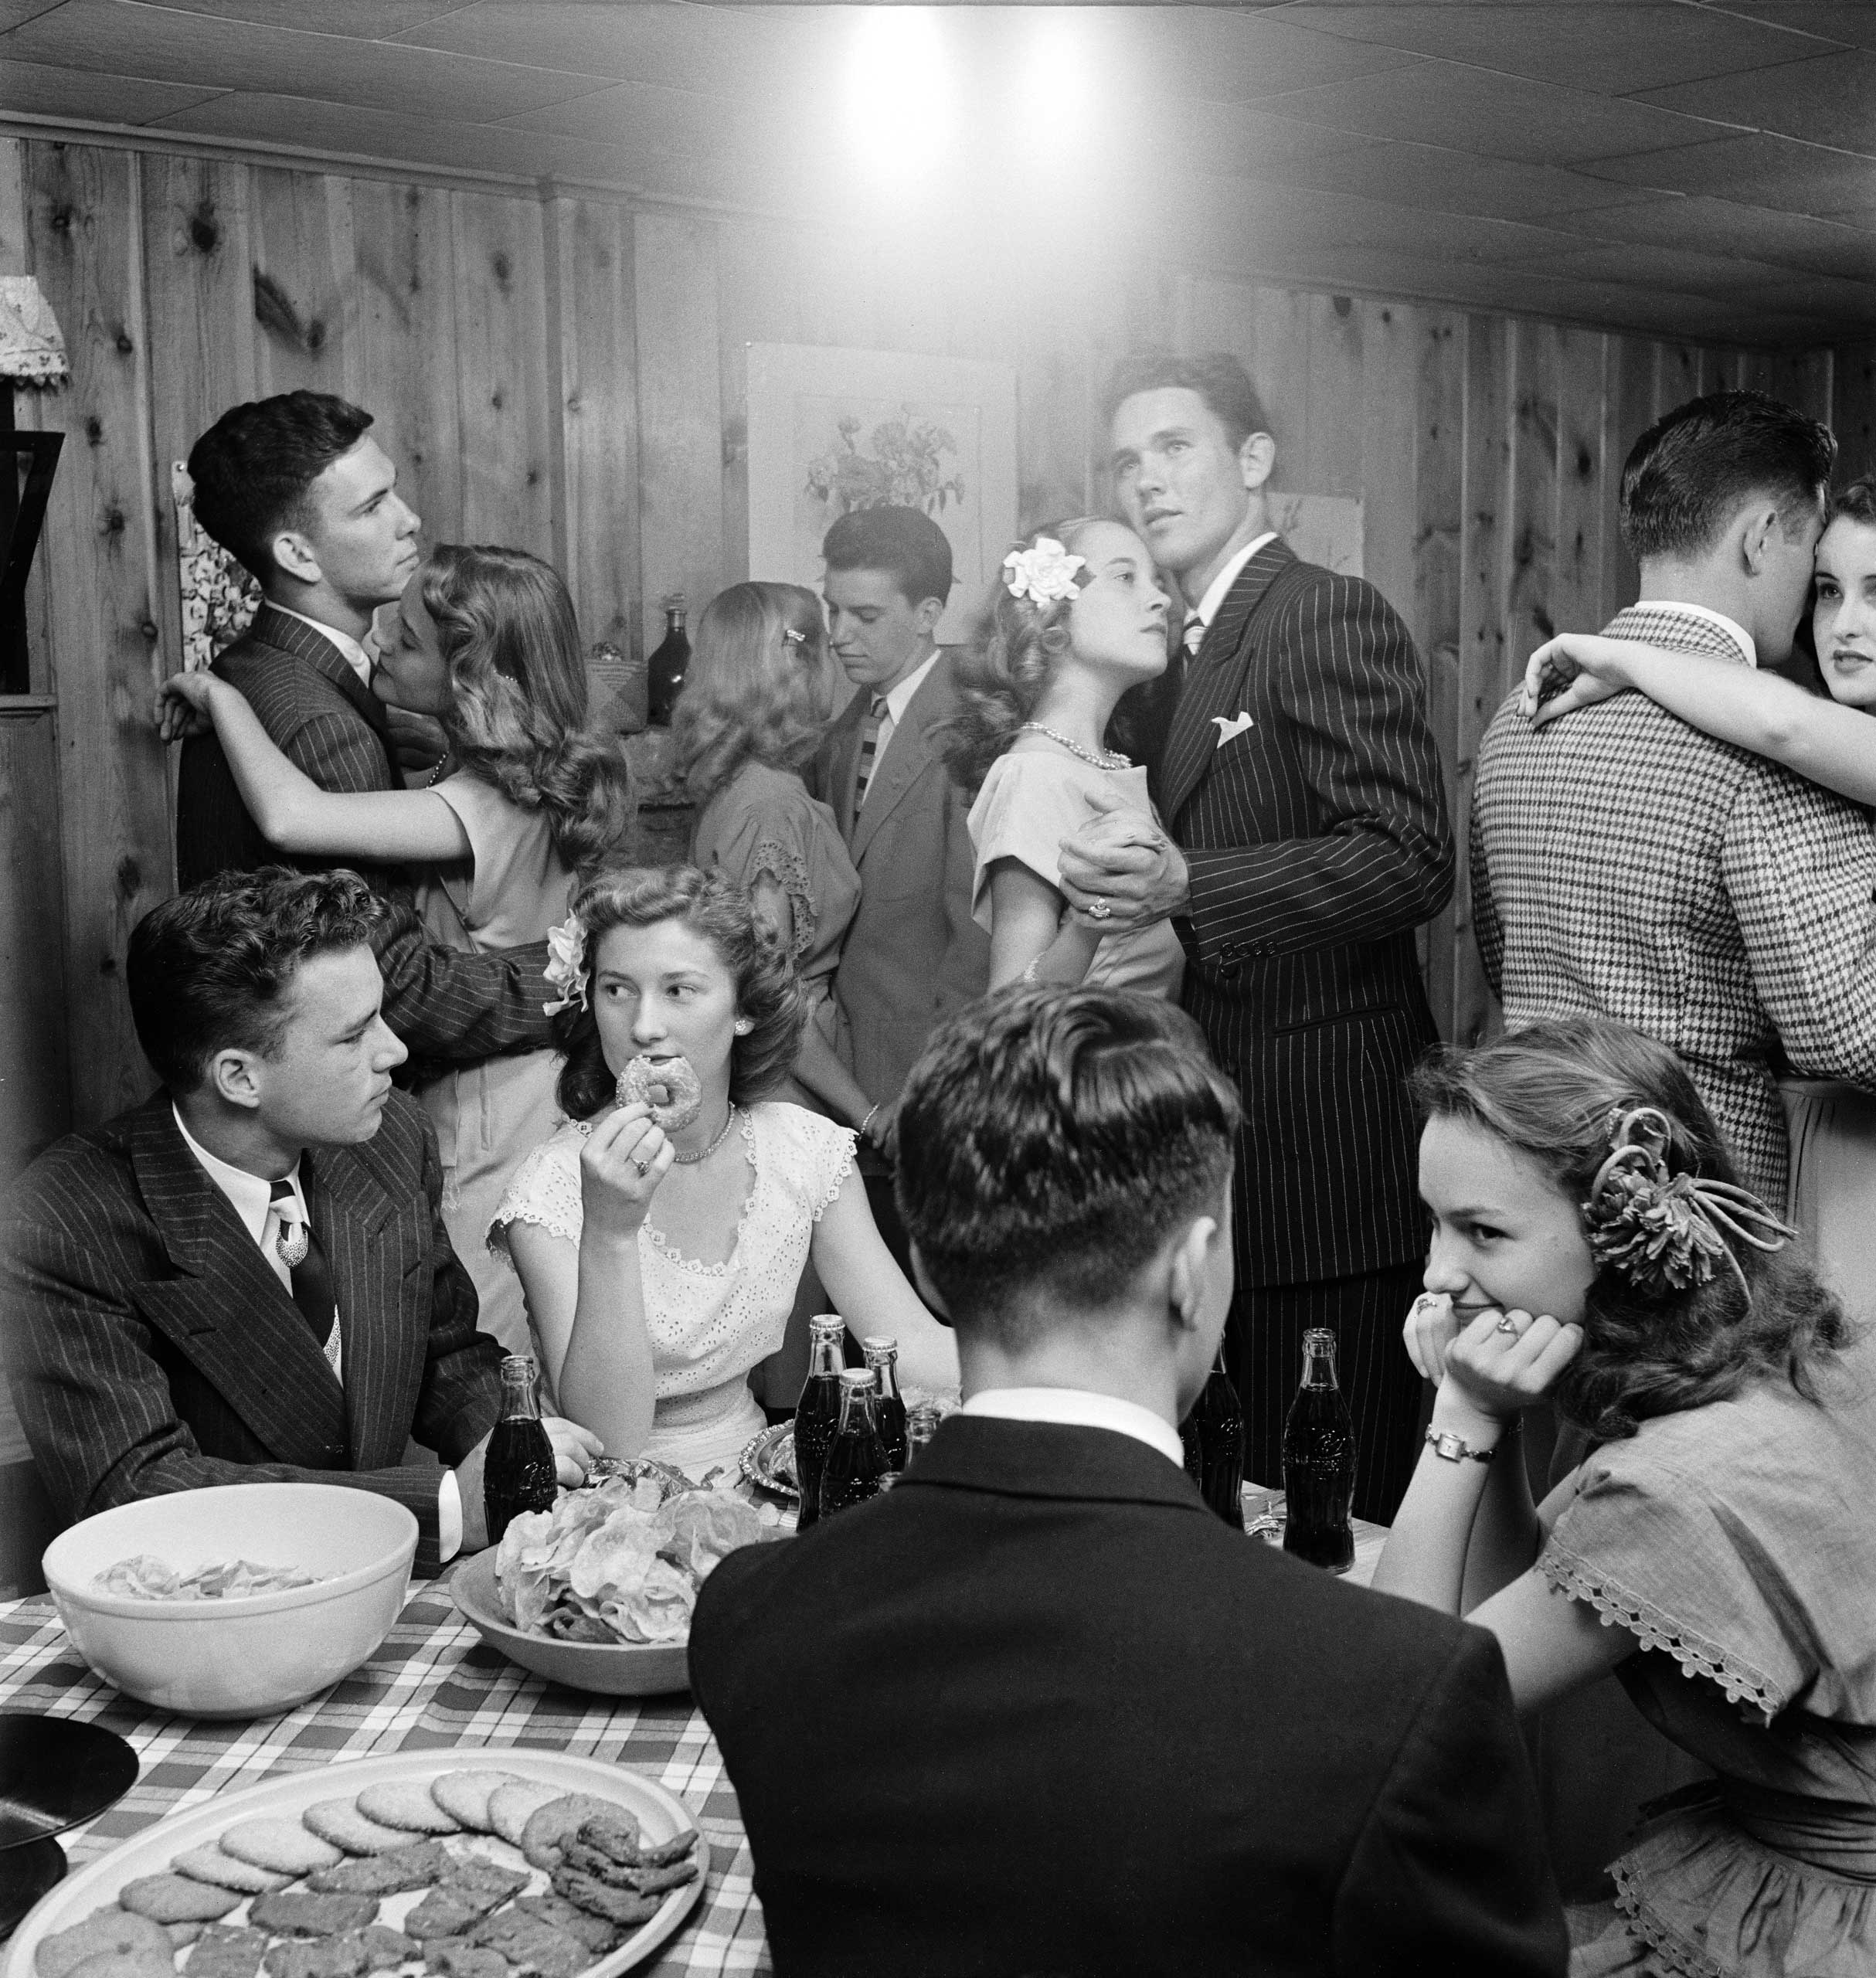 Teenagers at a party in 1947 in Tulsa, Oklahoma